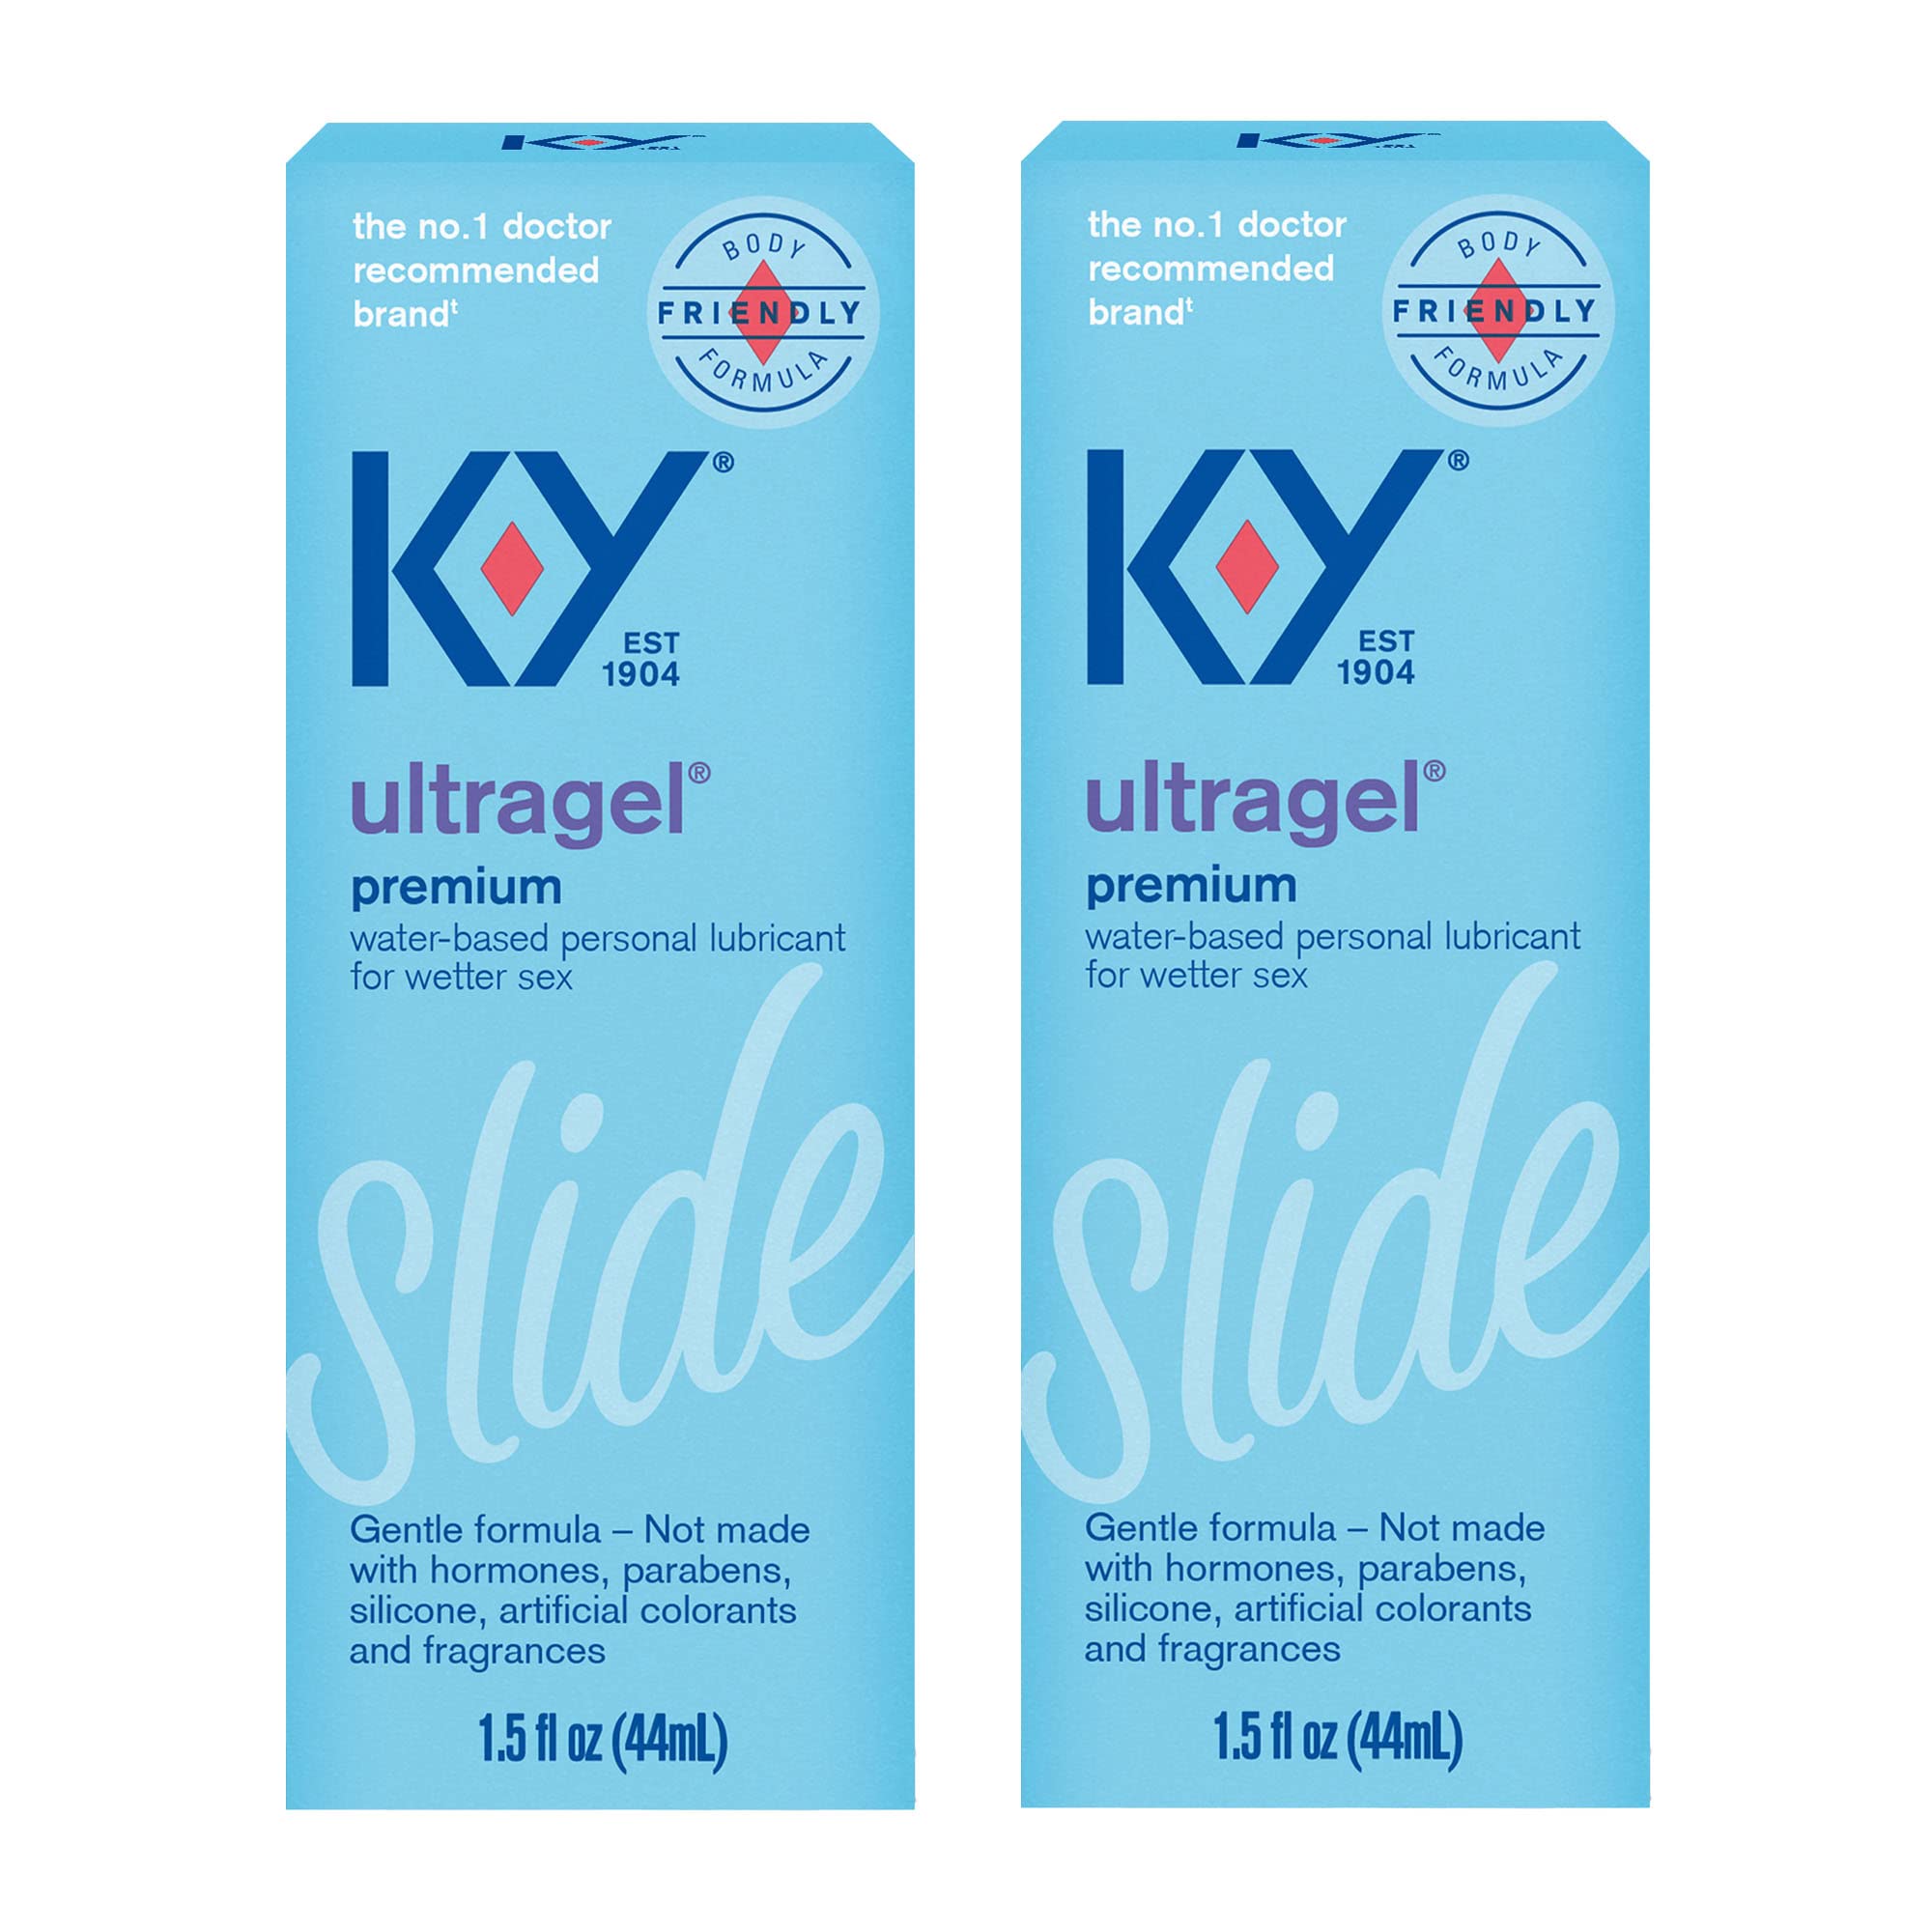 K-Y UltraGel Premium Water Based Lube- Personal Lubricant Safe To Use With Latex Condoms, Devices, Sex Toys and Vibrators, 1.5 oz. (Pack of 2)